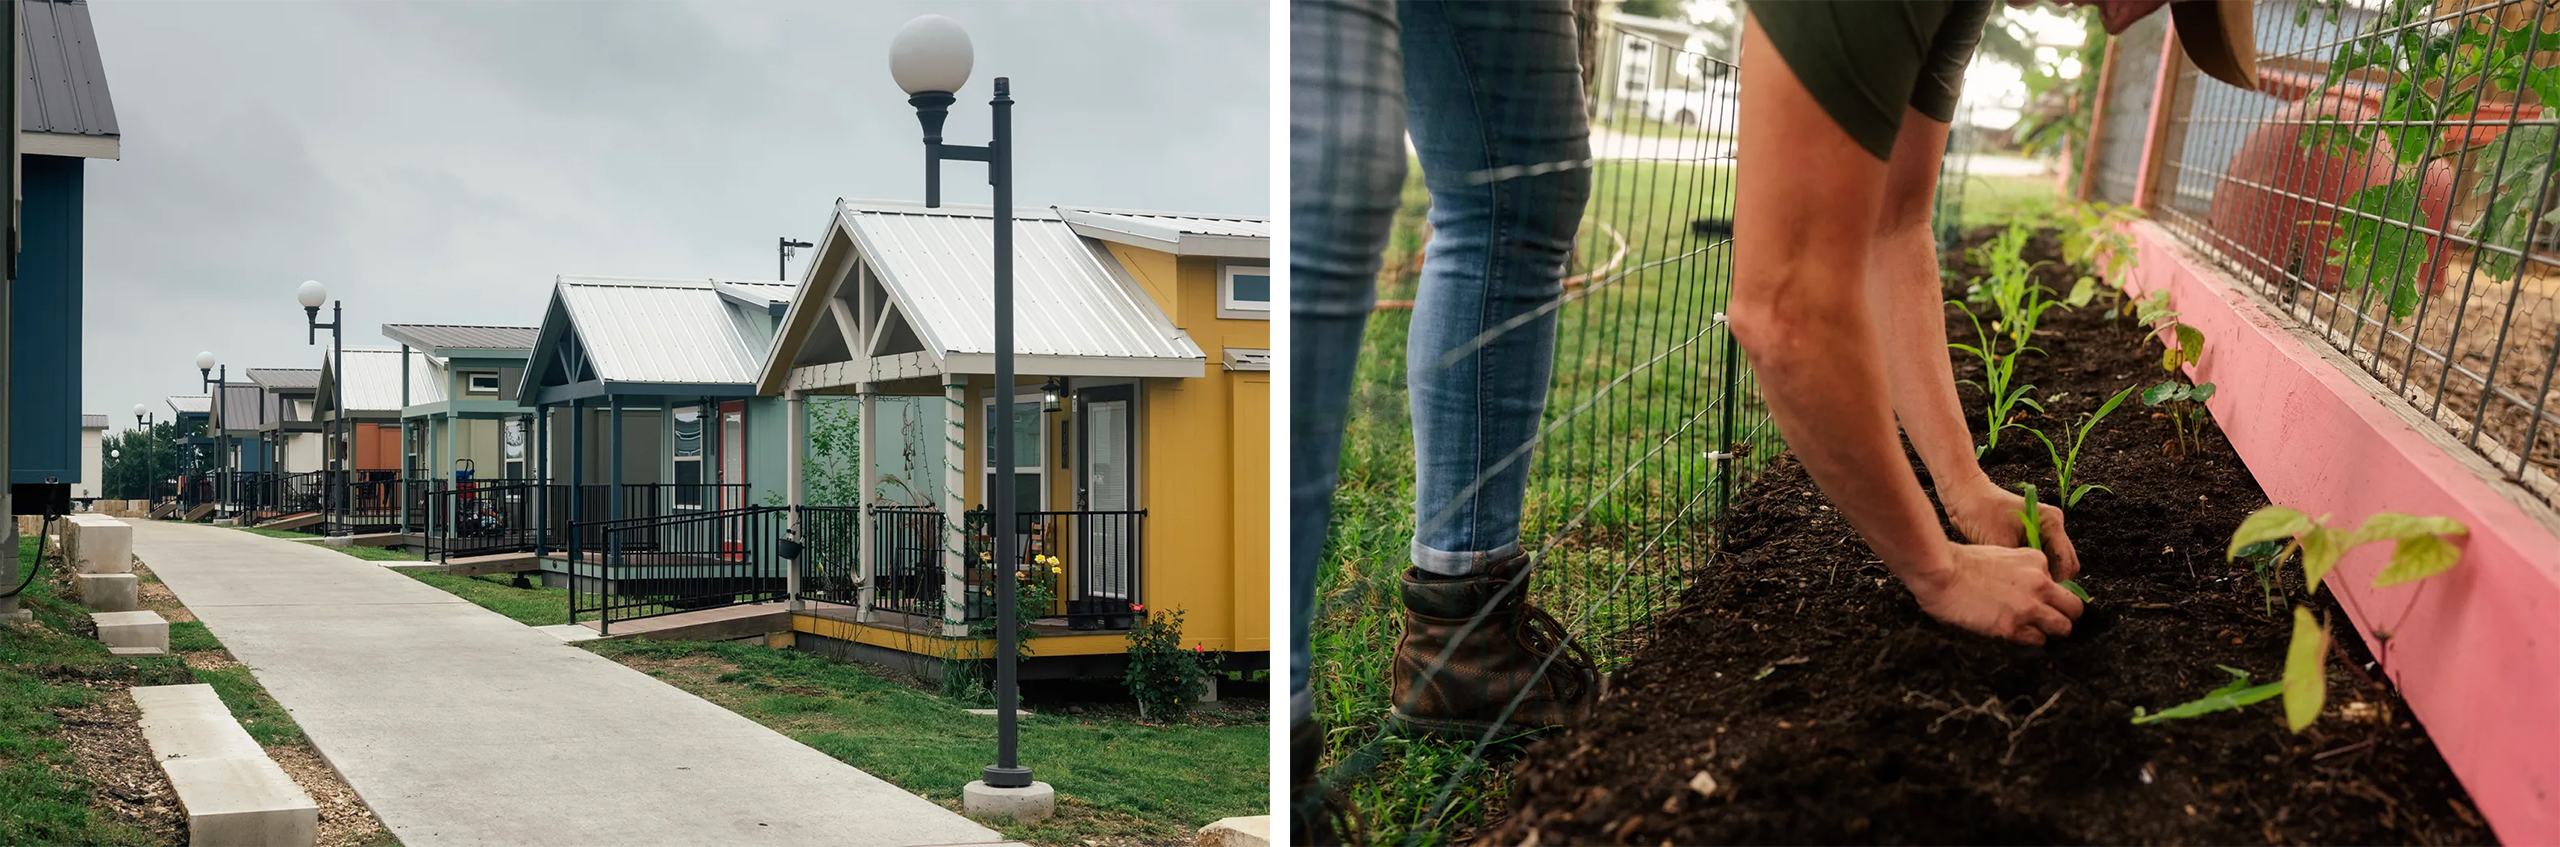 Left: Tiny homes used as residences at Community First! Village in Austin, Texas on May 12, 2023. Right: An employee plants sunflowers at Community First! Village in Austin, Texas on May 12, 2023.